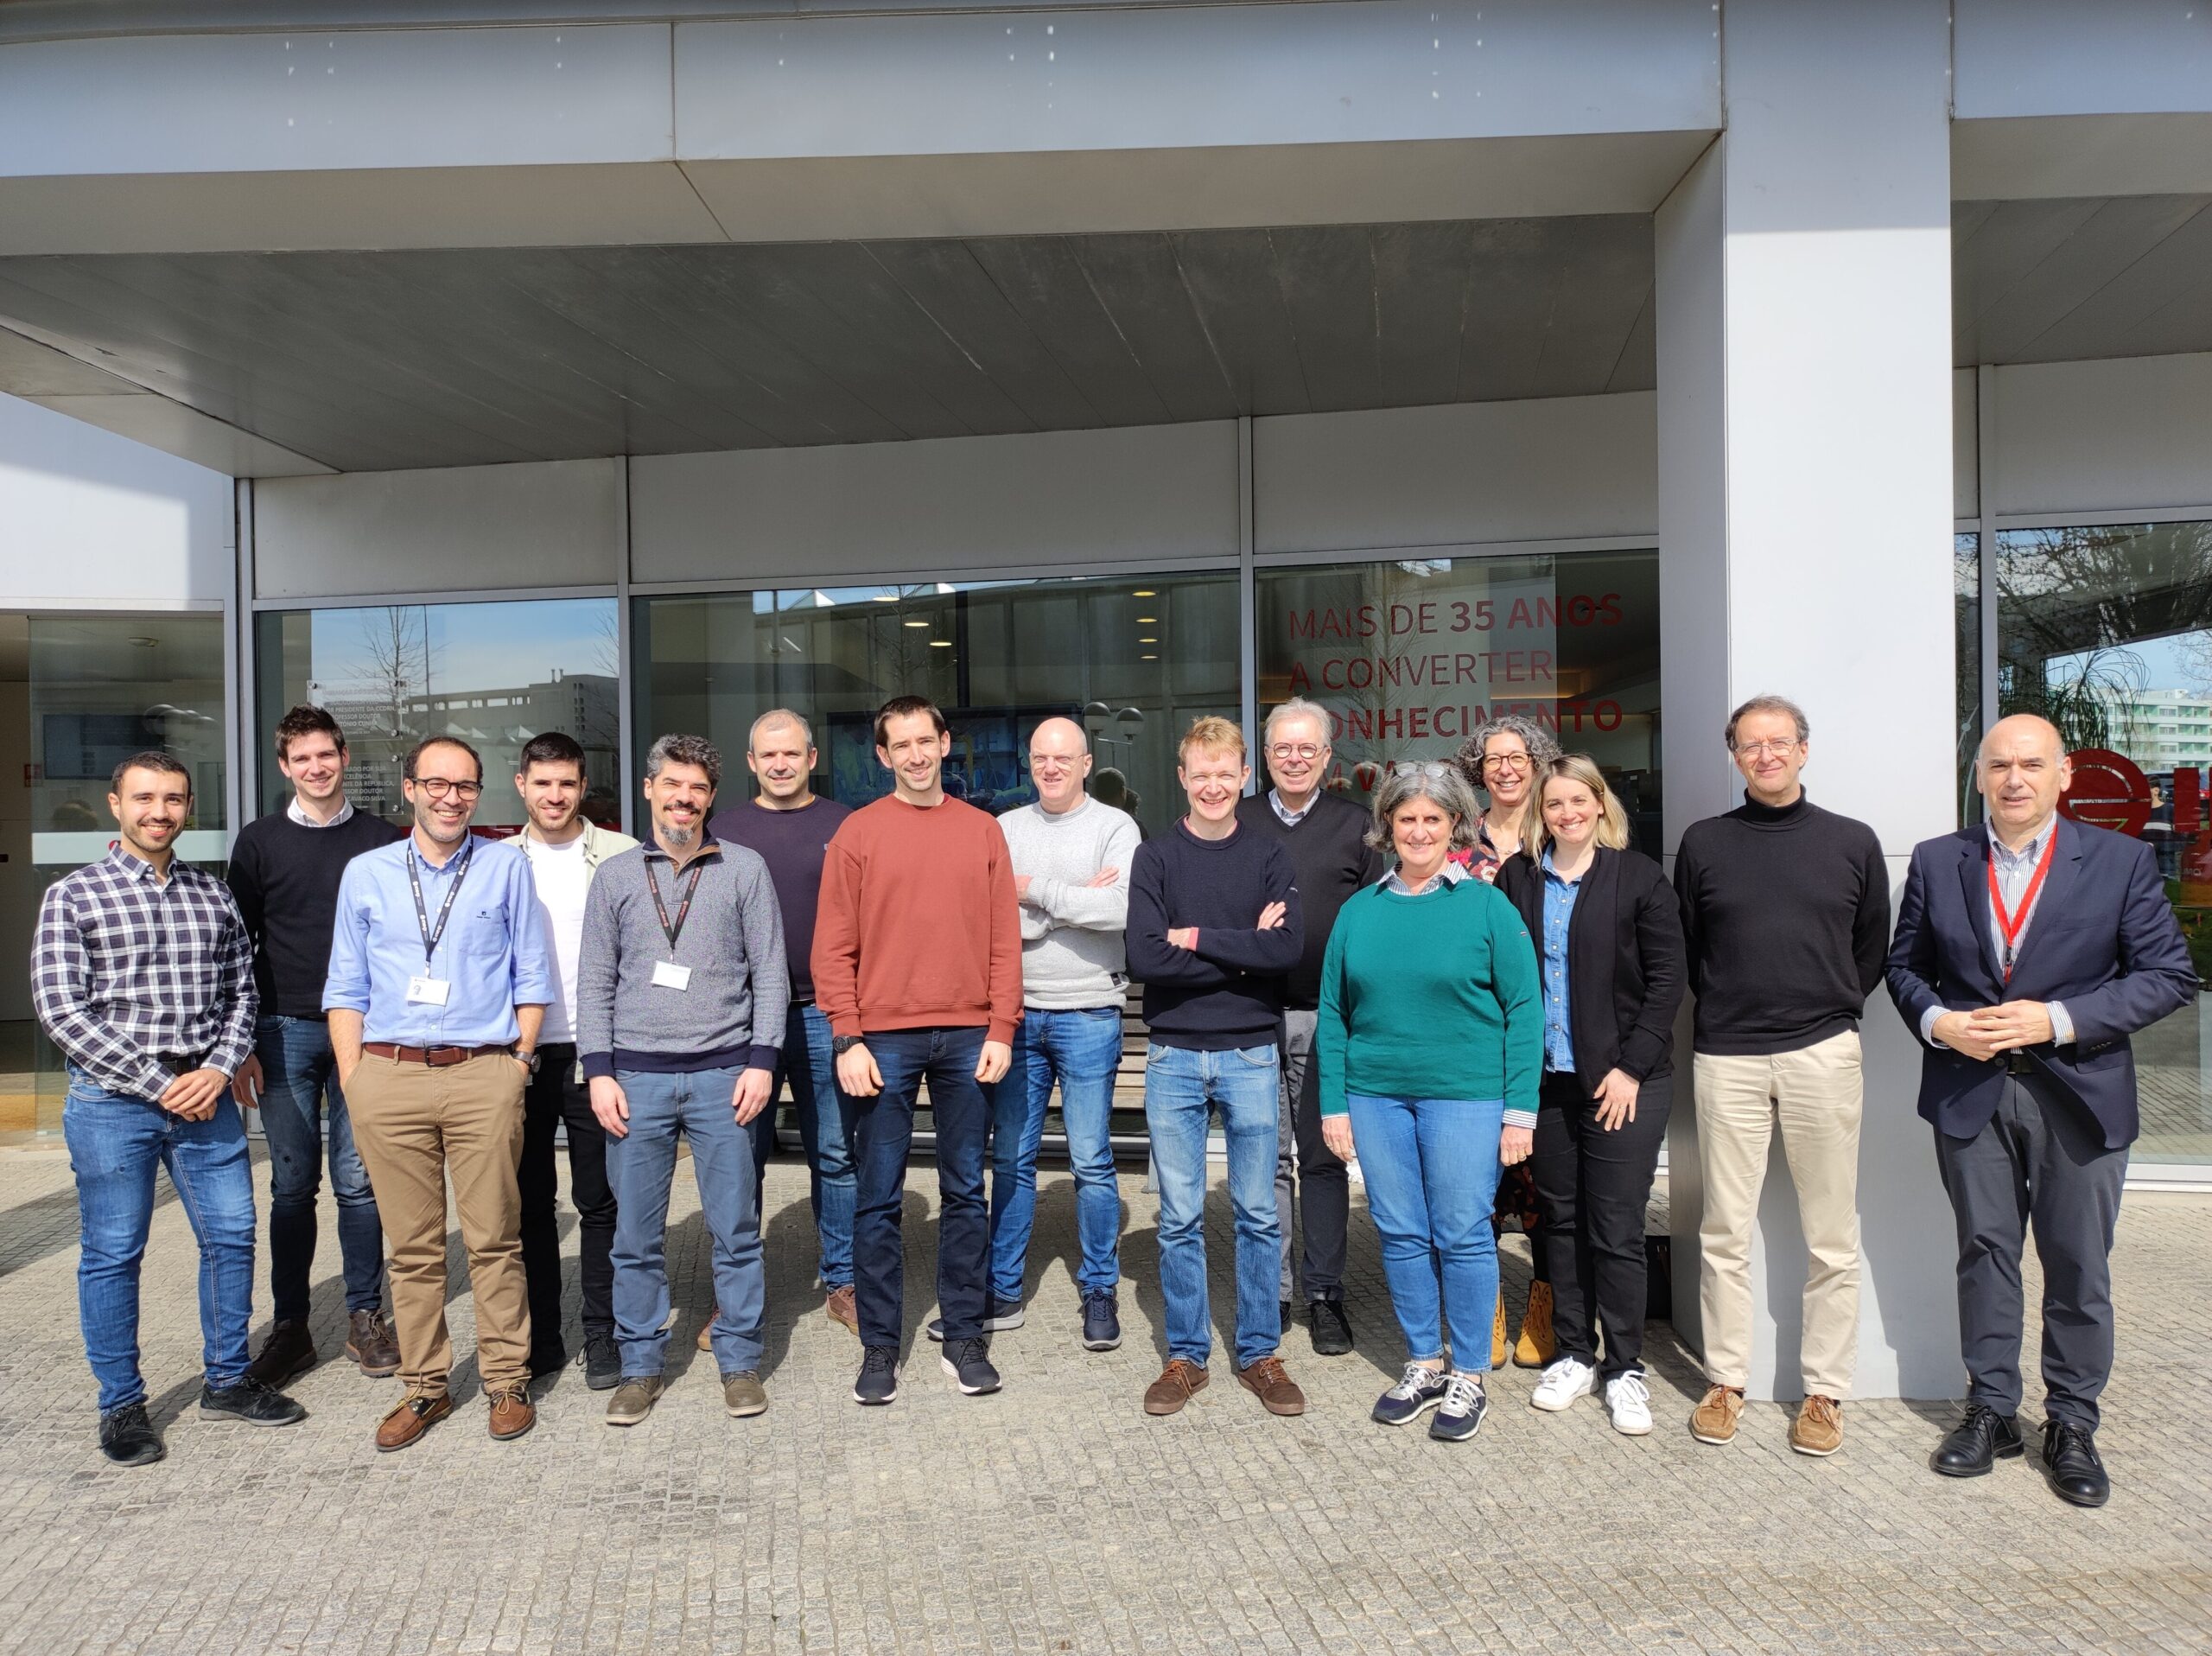 EARASHI Open call 2 consolidation days successfully took place in Porto